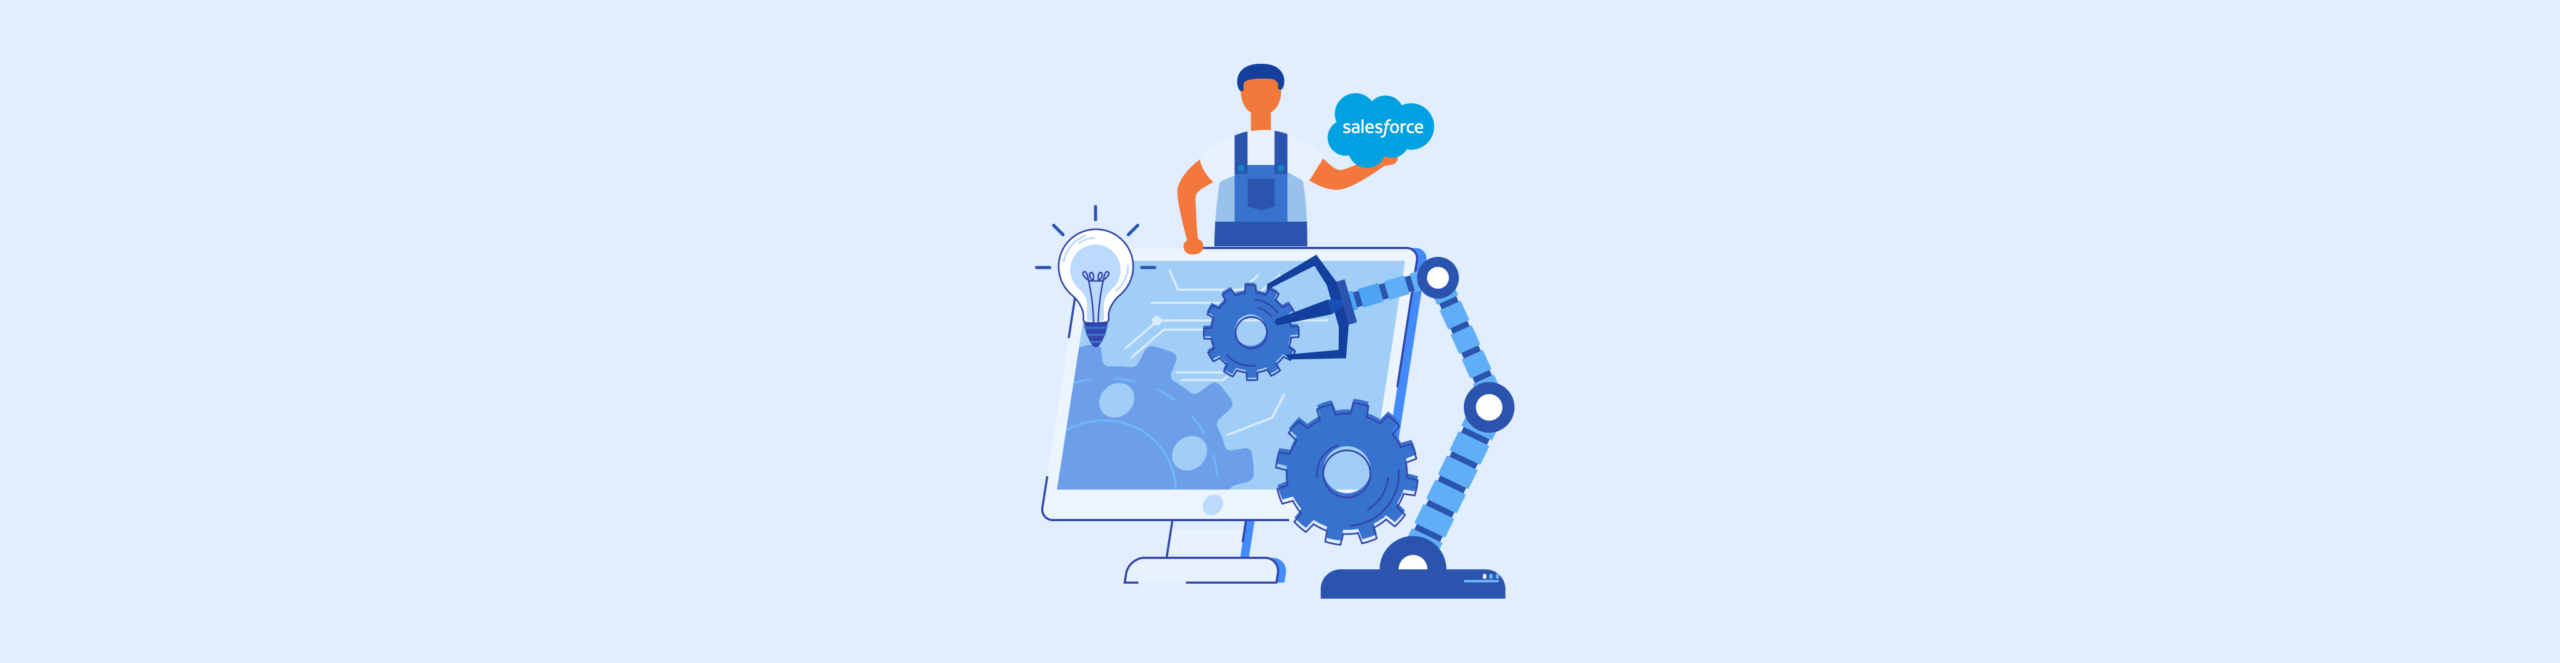 Salesforce Automation Solutions